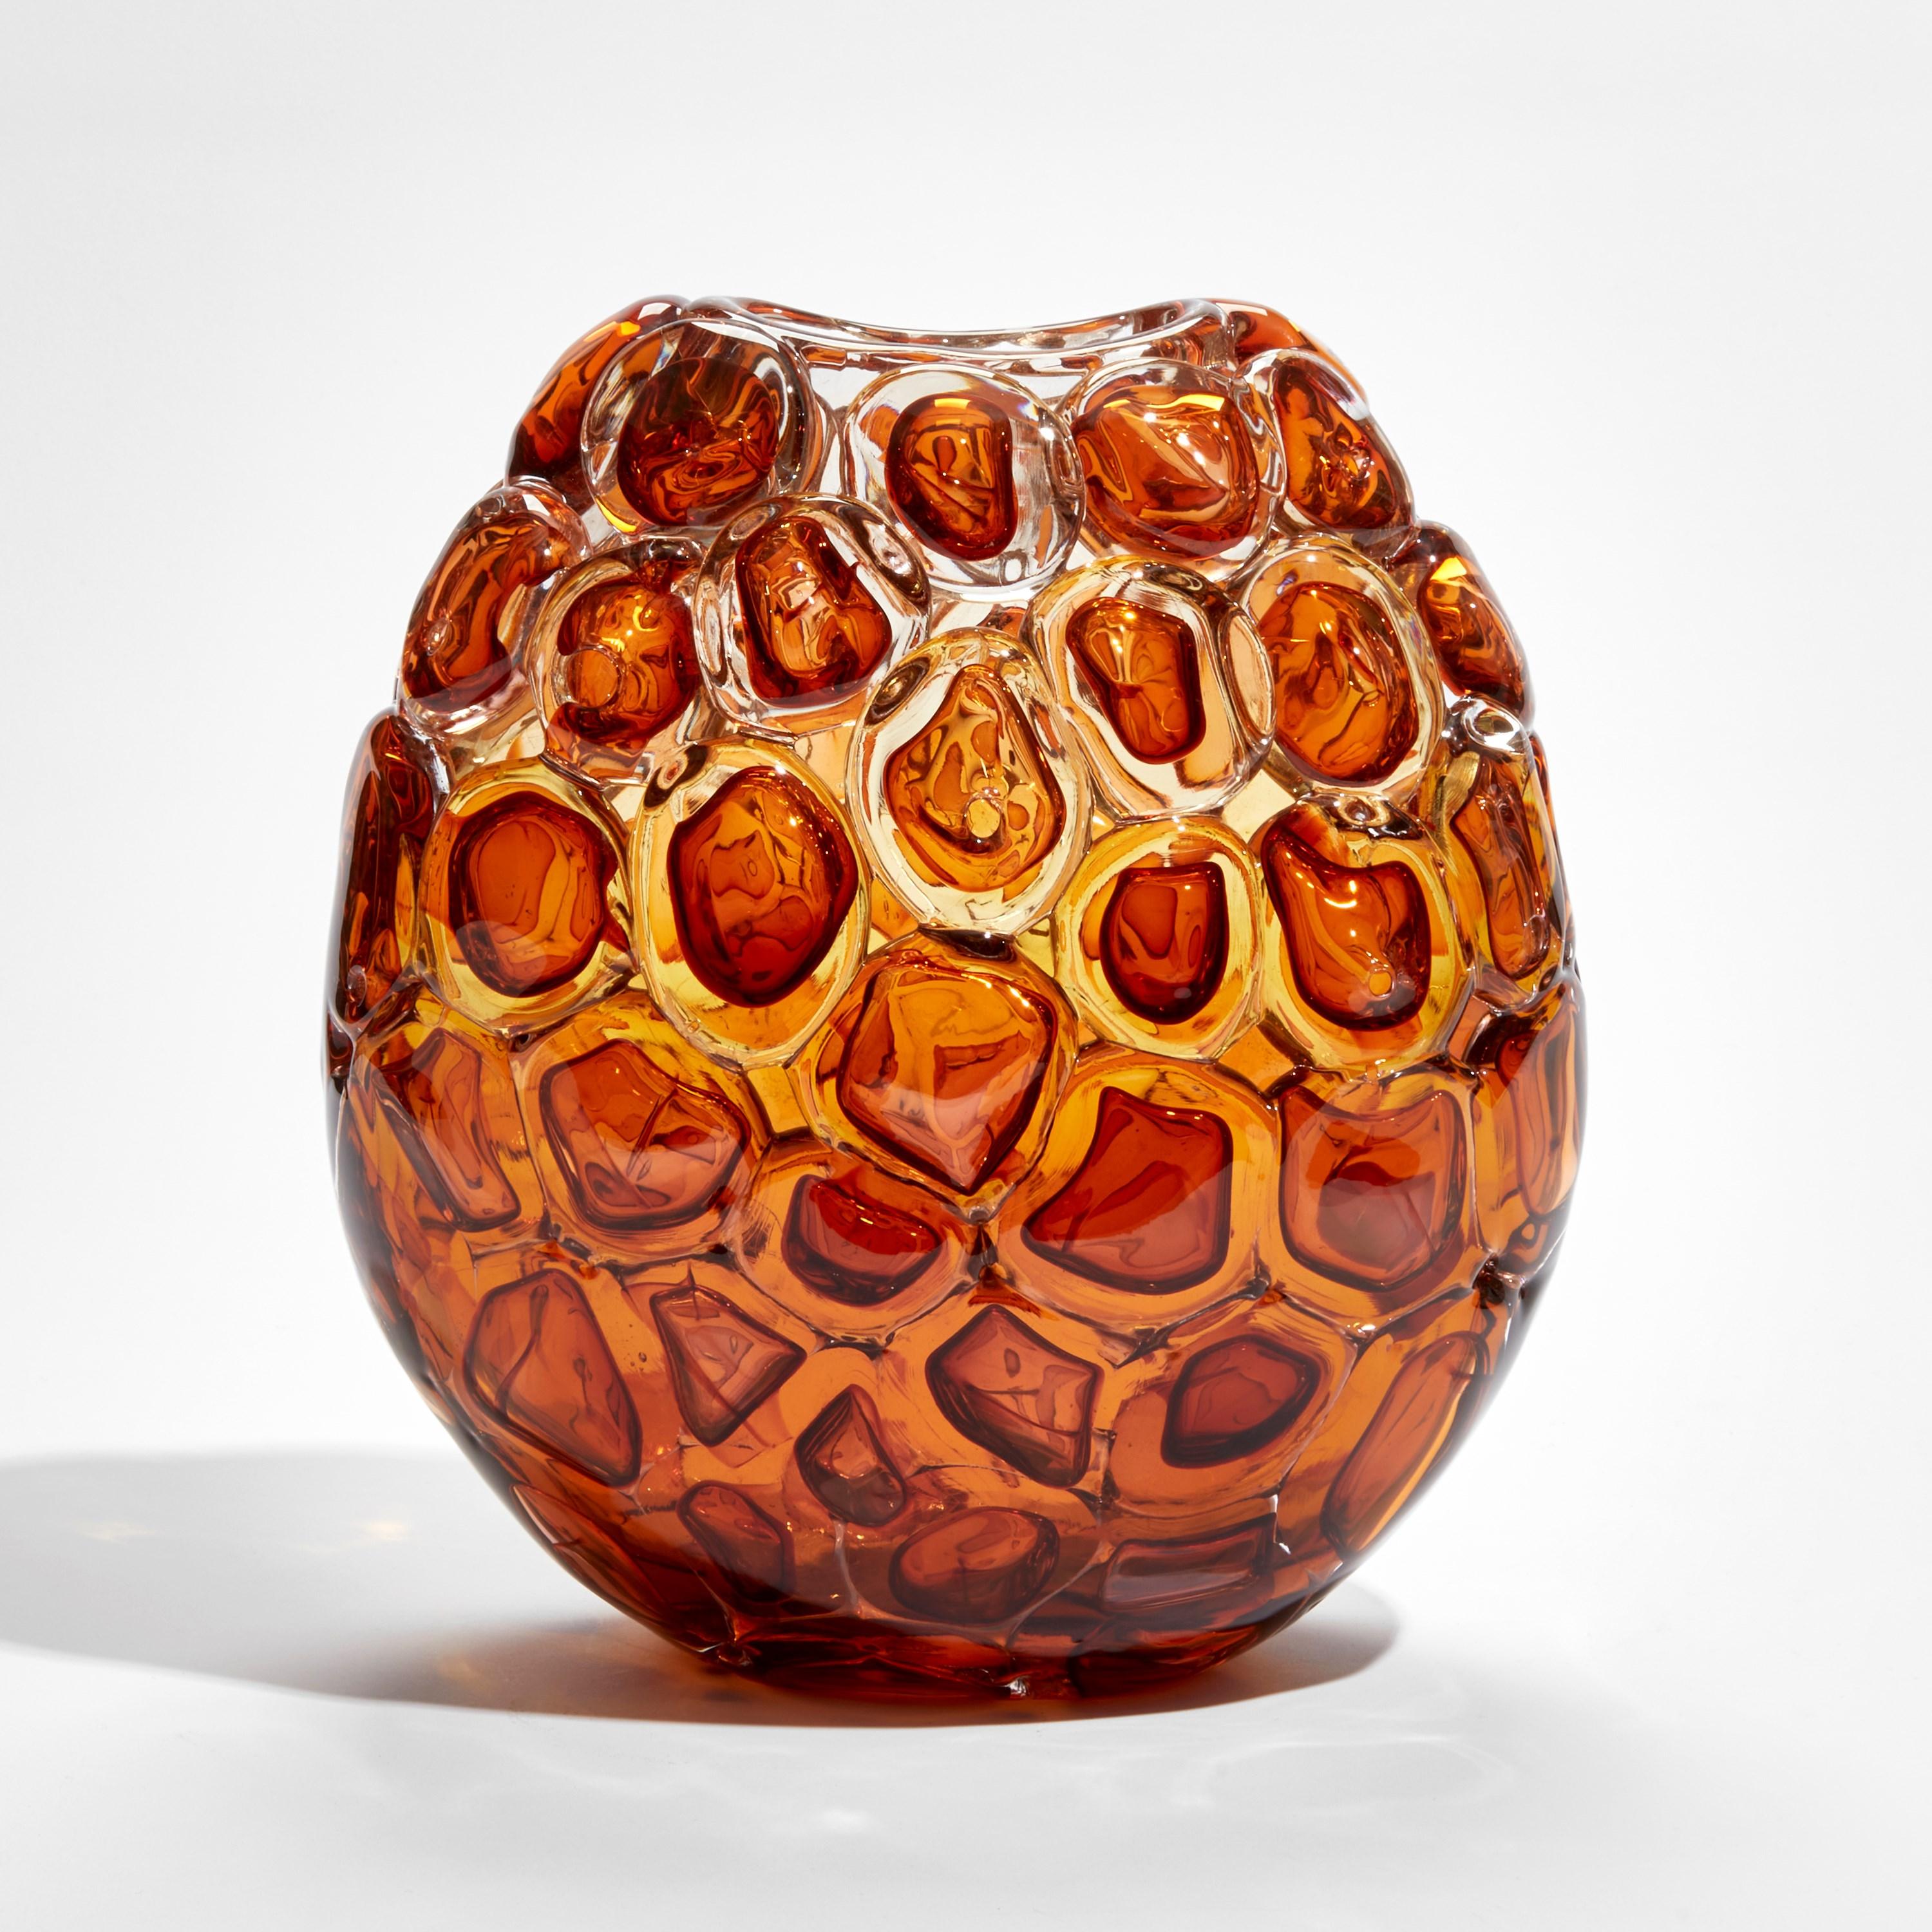 'Bubblewrap in Burnt Orange' is a handblown and sculpted vase created from rich amber / orange coloured glass by the British artist, Allister Malcolm. Playful yet elegant, Malcolm has formed oversized bubbles on the exterior of this handcrafted and